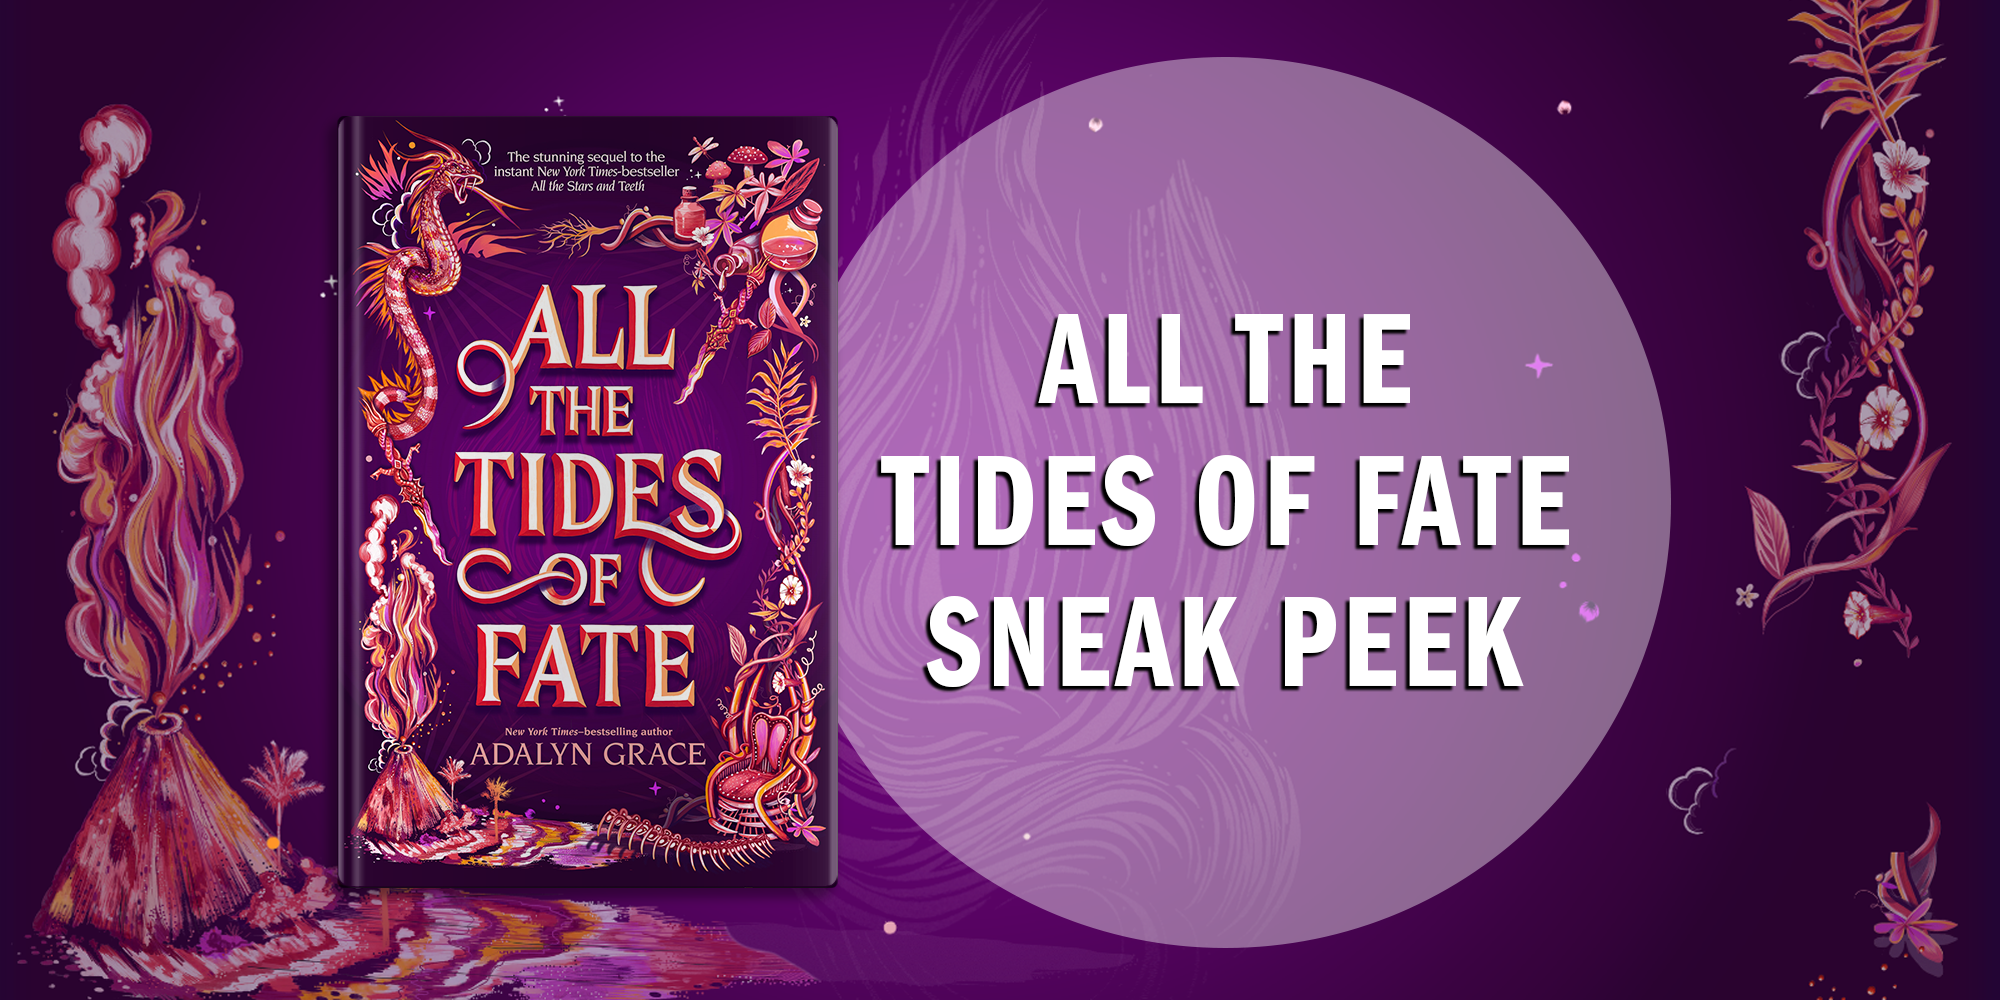 Set Sail With a Sneak Peek at All the Tides of Fate